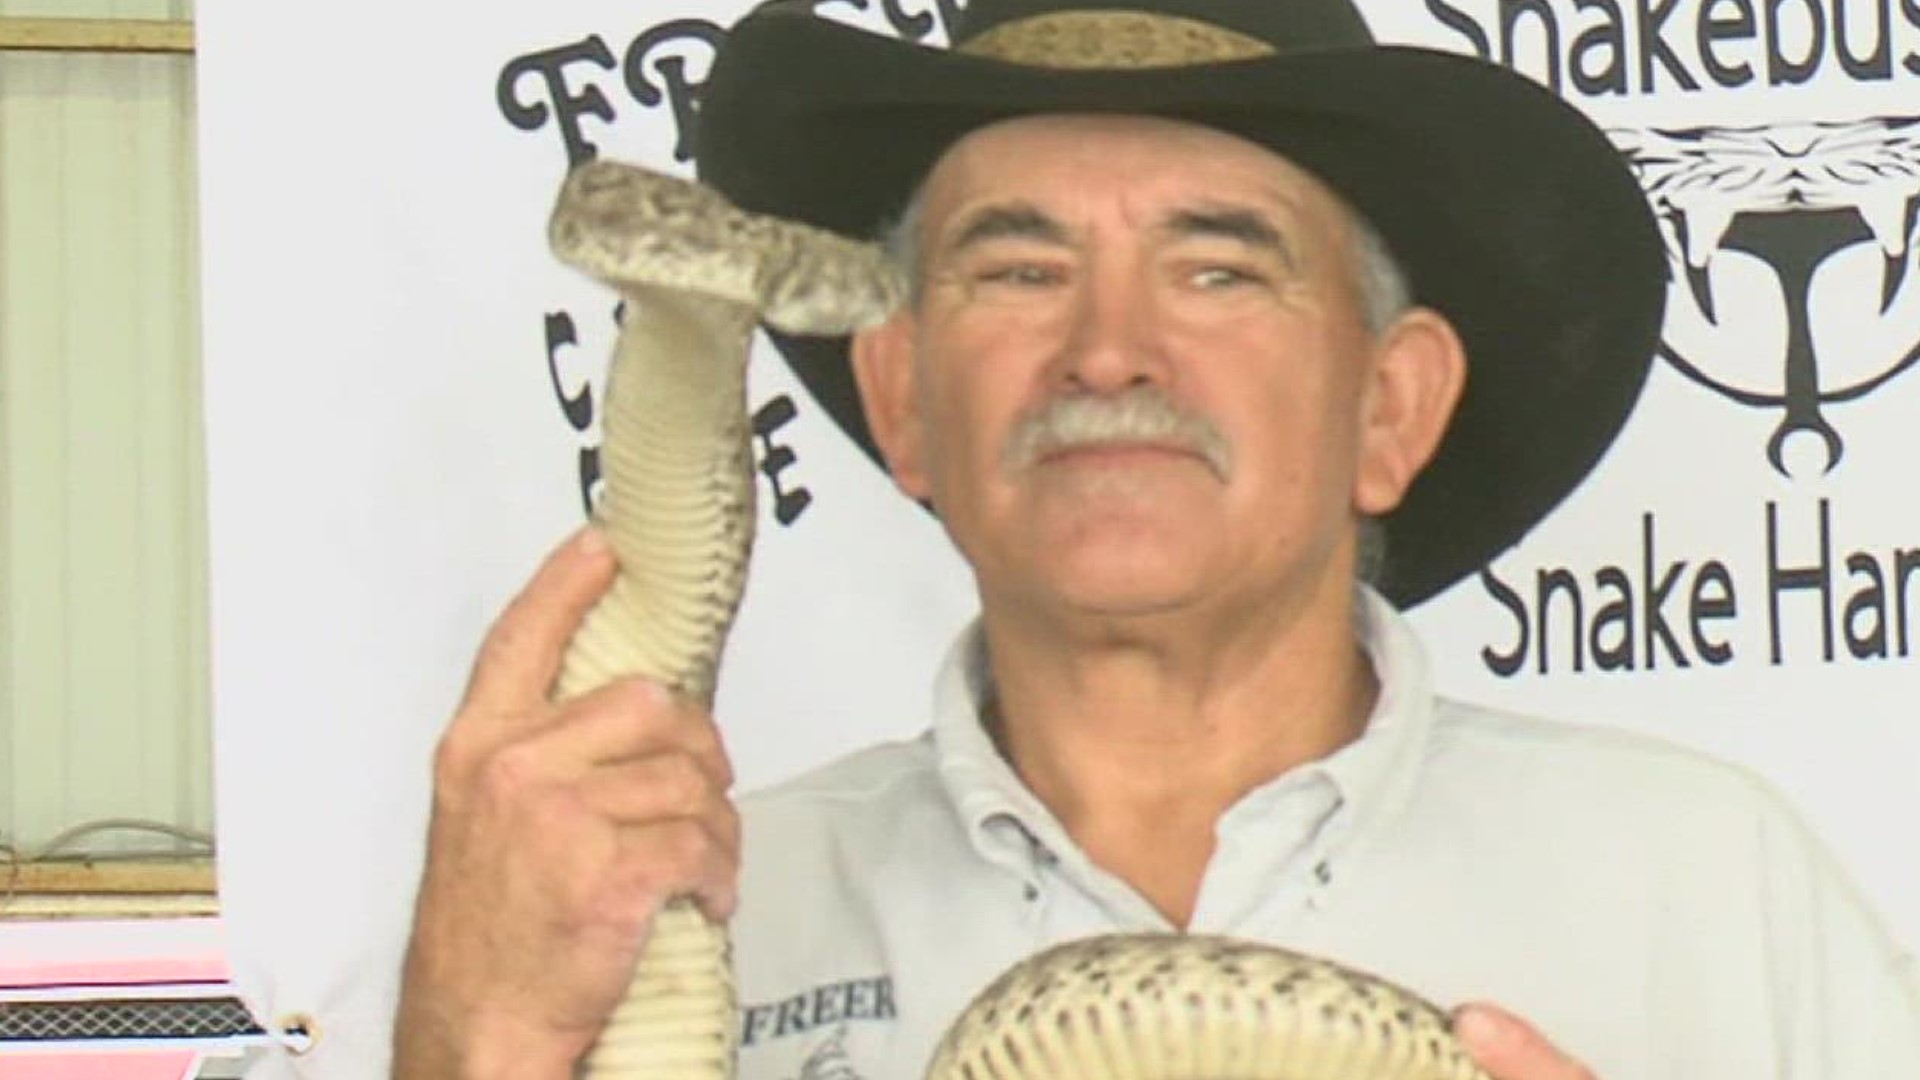 Eugene DeLeon Sr. died around 9 p.m. Saturday night, approximately 8 hours after he was bitten by a rattlesnake at a city event in Freer.